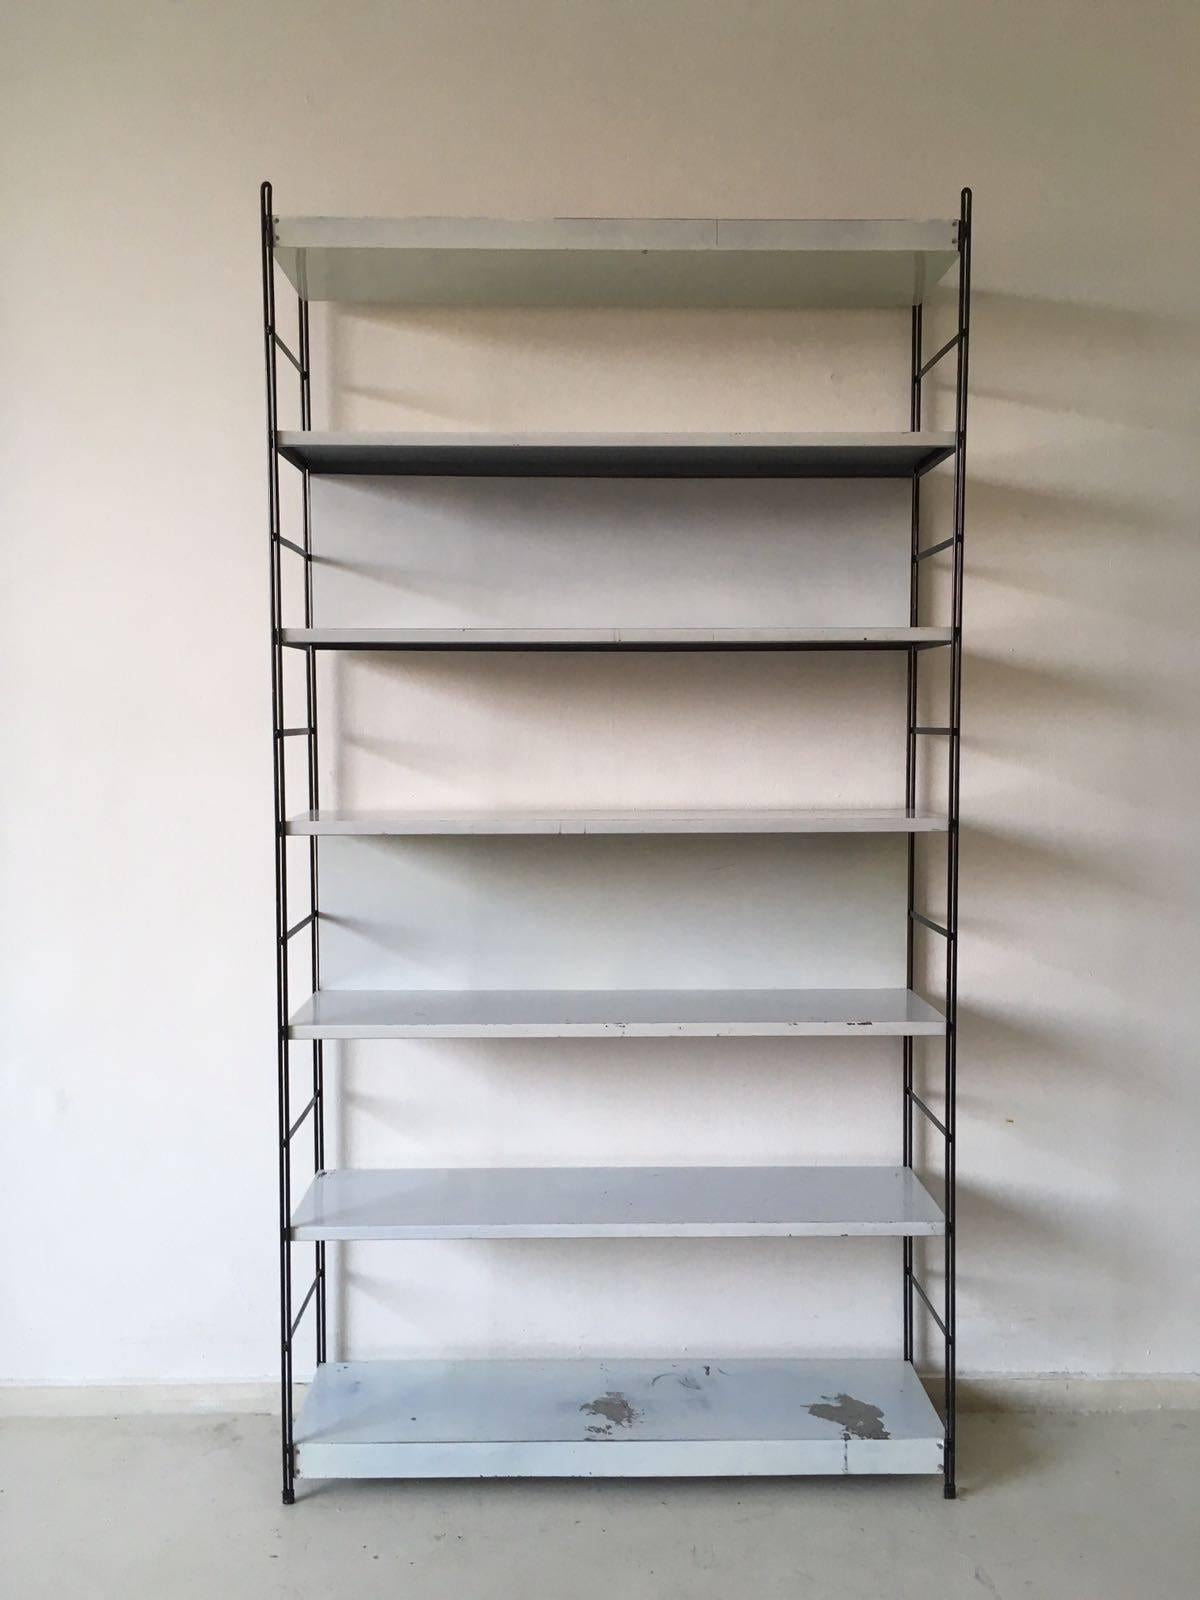 This minimalistic freestanding rack was designed and manufactured in The Netherlands circa 1960s. It resembles models of Pilastro, Tomado, Drentea.
Two of the shelves feature a metal back which is also to be seen often with pieces by Friso Kramer.